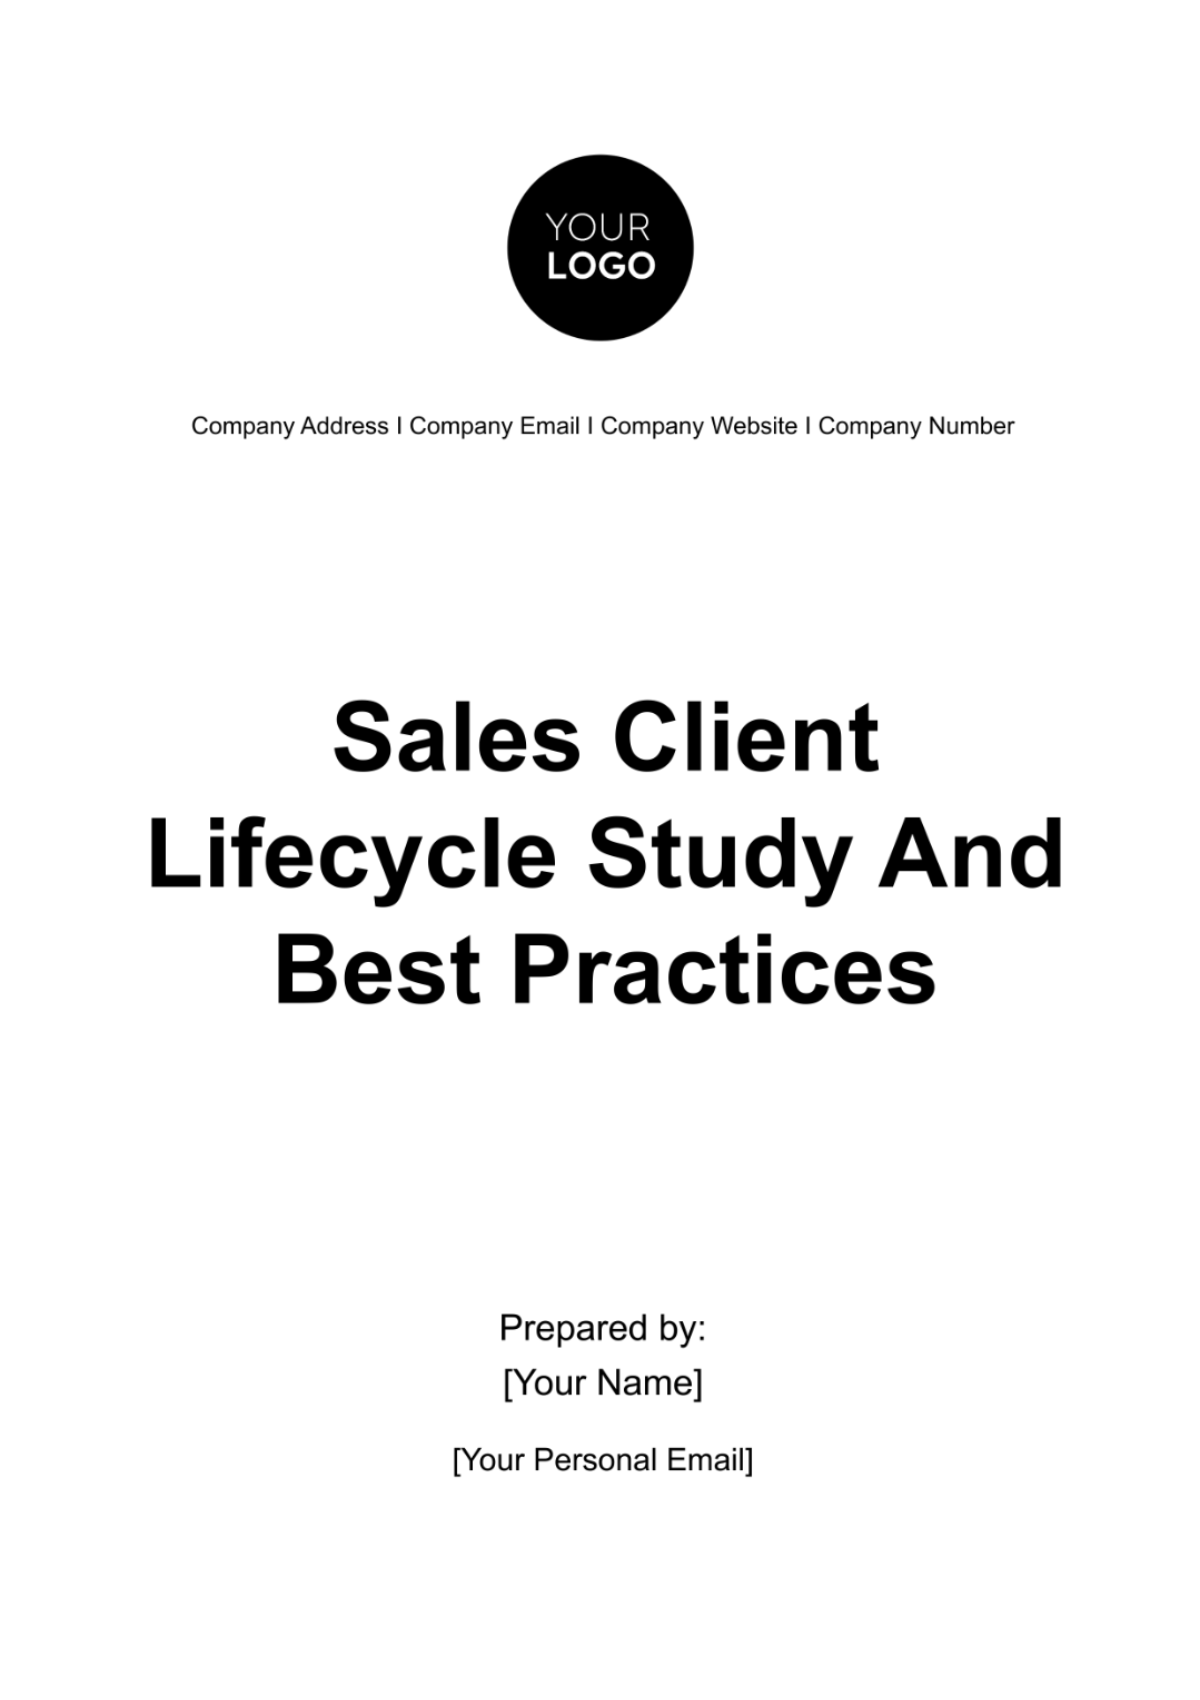 Sales Client Lifecycle Study and Best Practices Template